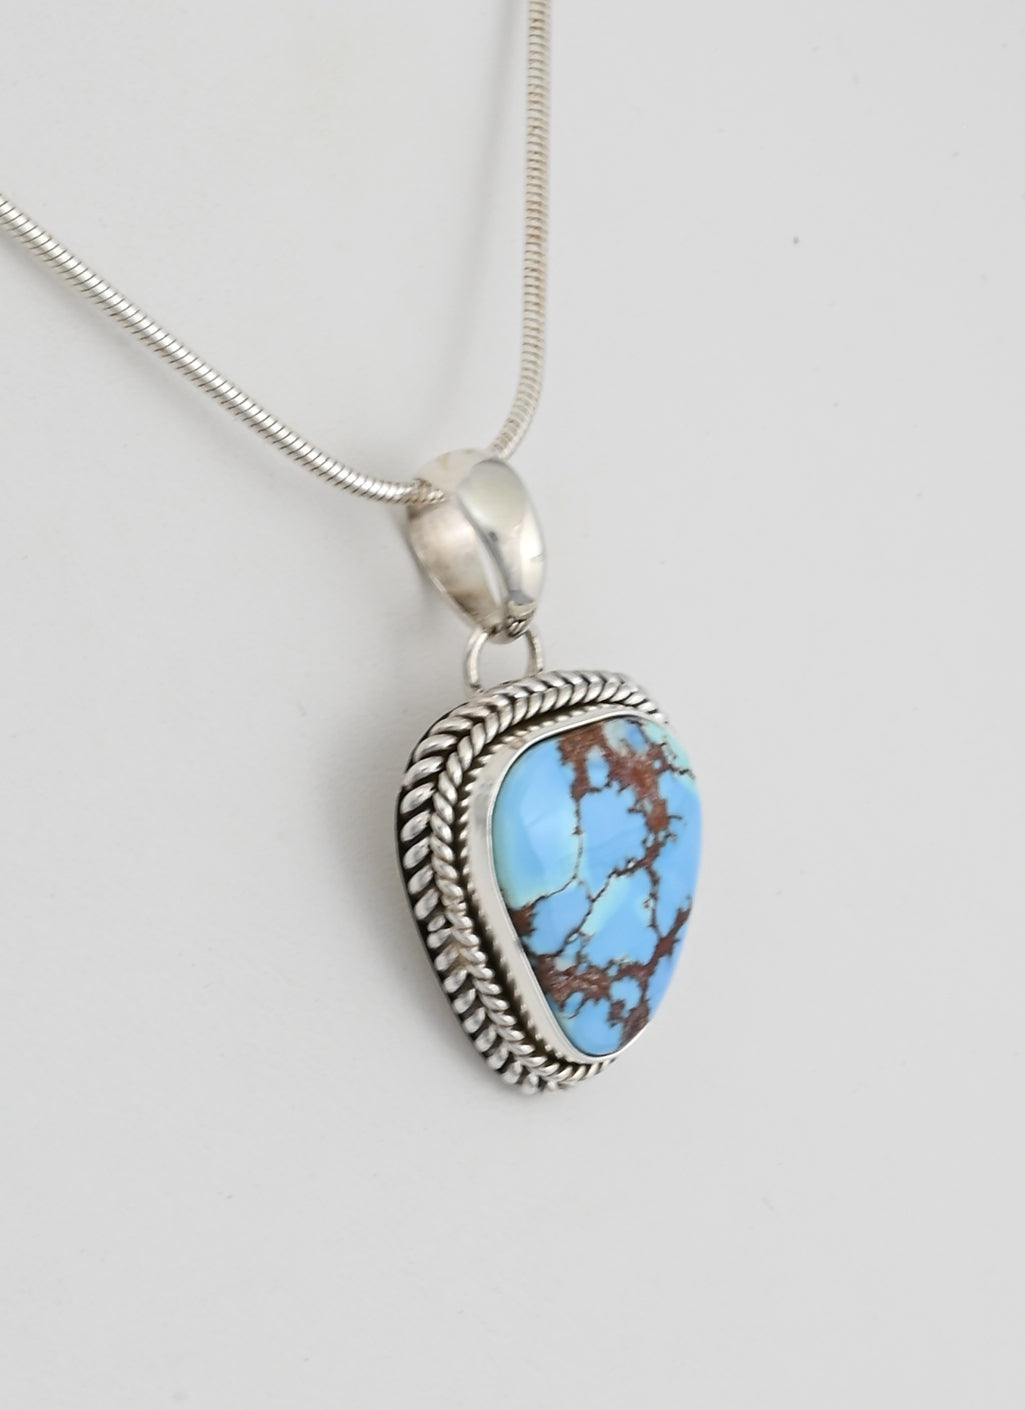 Pendant with Golden Hills Turquoise Pendant by Artie Yellowhorse